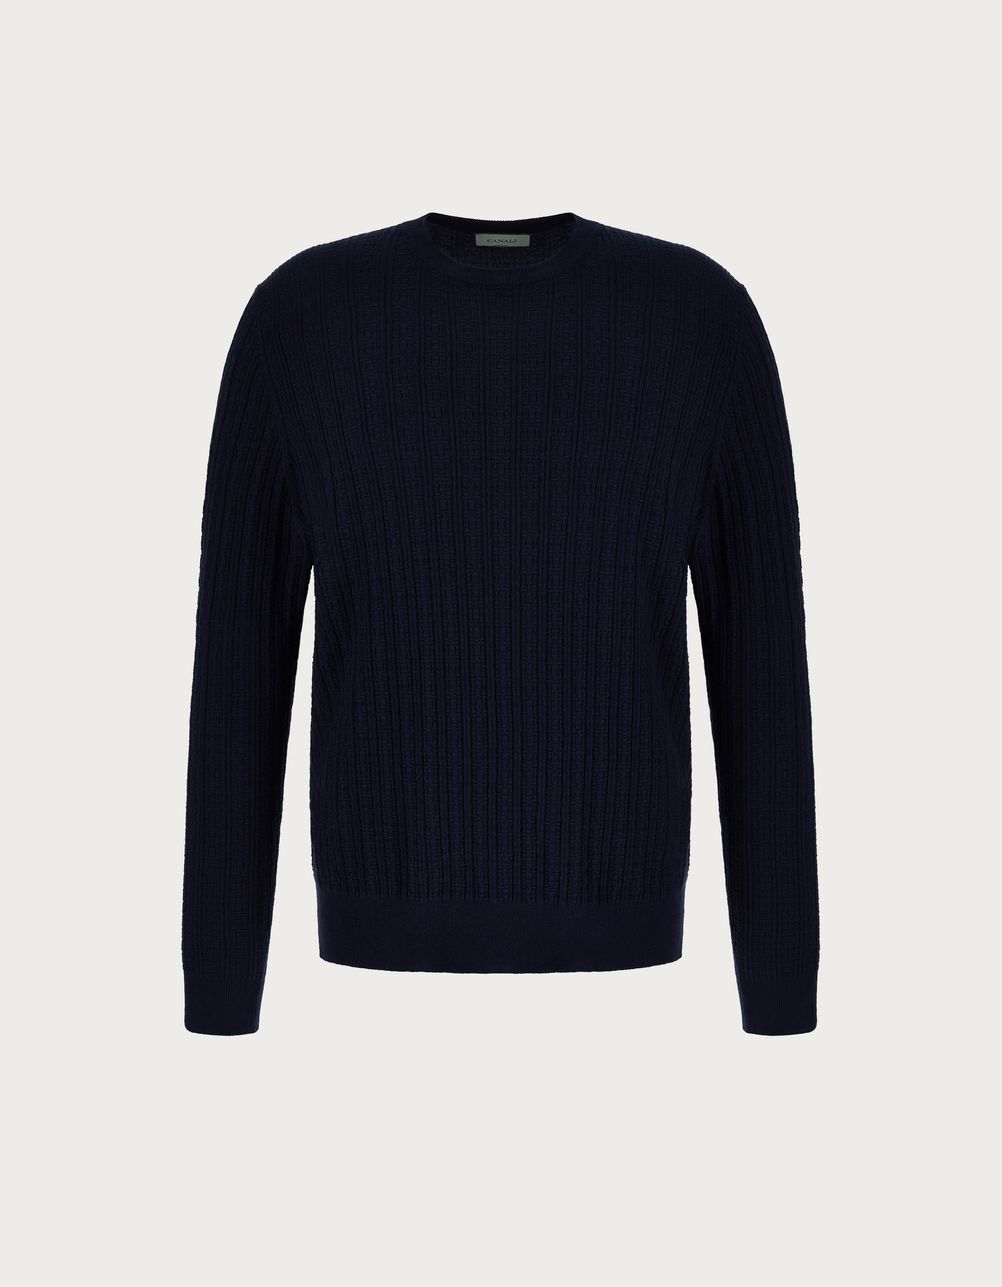 Navy blue structured crew-neck in garment-dyed shaved cotton